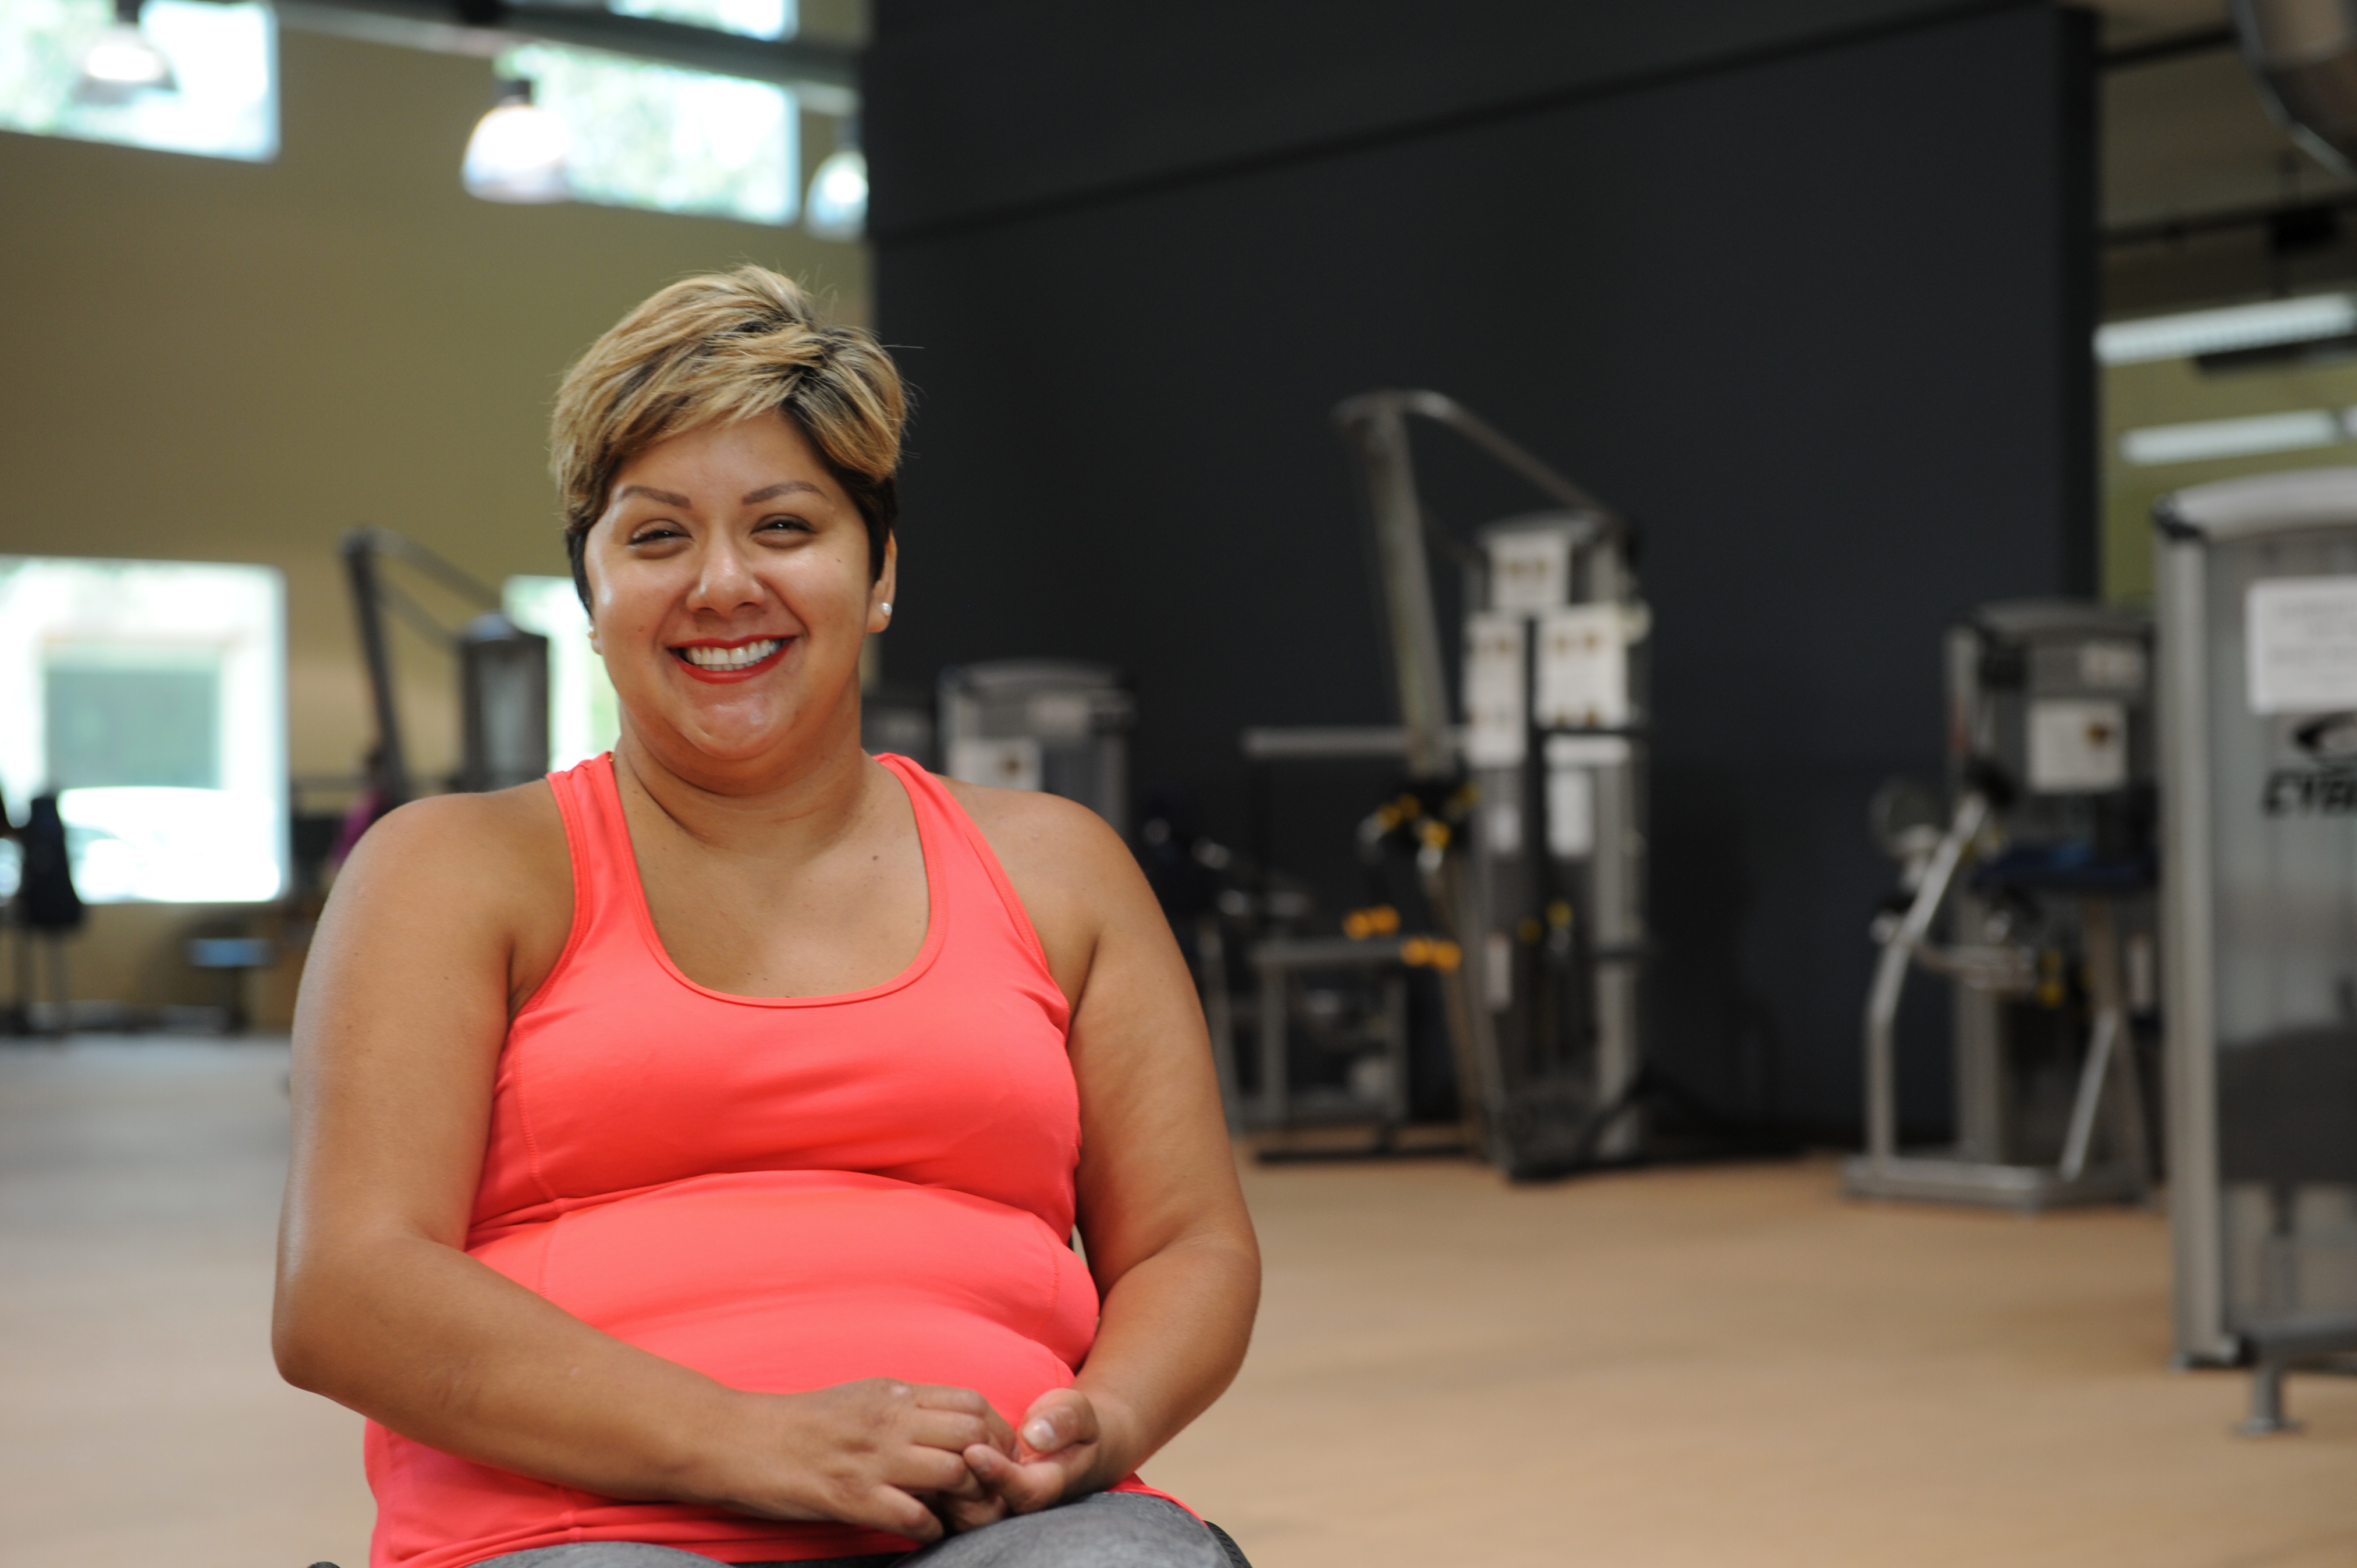 Devina Robias poses inside Goodwill of Orange County’s Rogers A. Severson Fitness & Technology Center